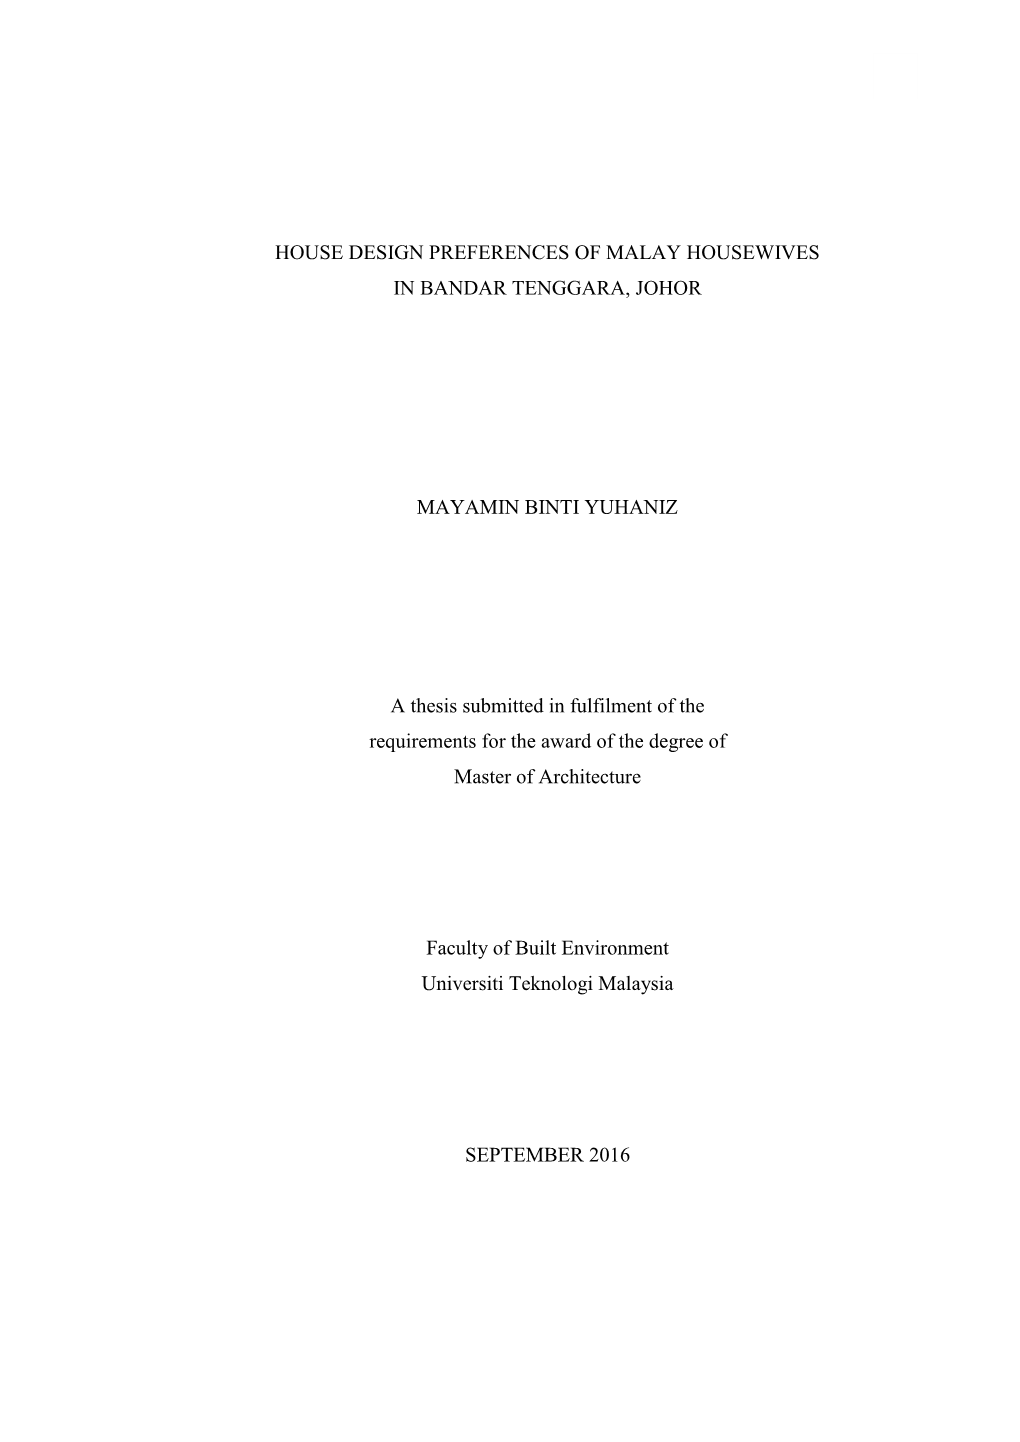 I HOUSE DESIGN PREFERENCES of MALAY HOUSEWIVES in BANDAR TENGGARA, JOHOR MAYAMIN BINTI YUHANIZ a Thesis Submitted in Fulfilment